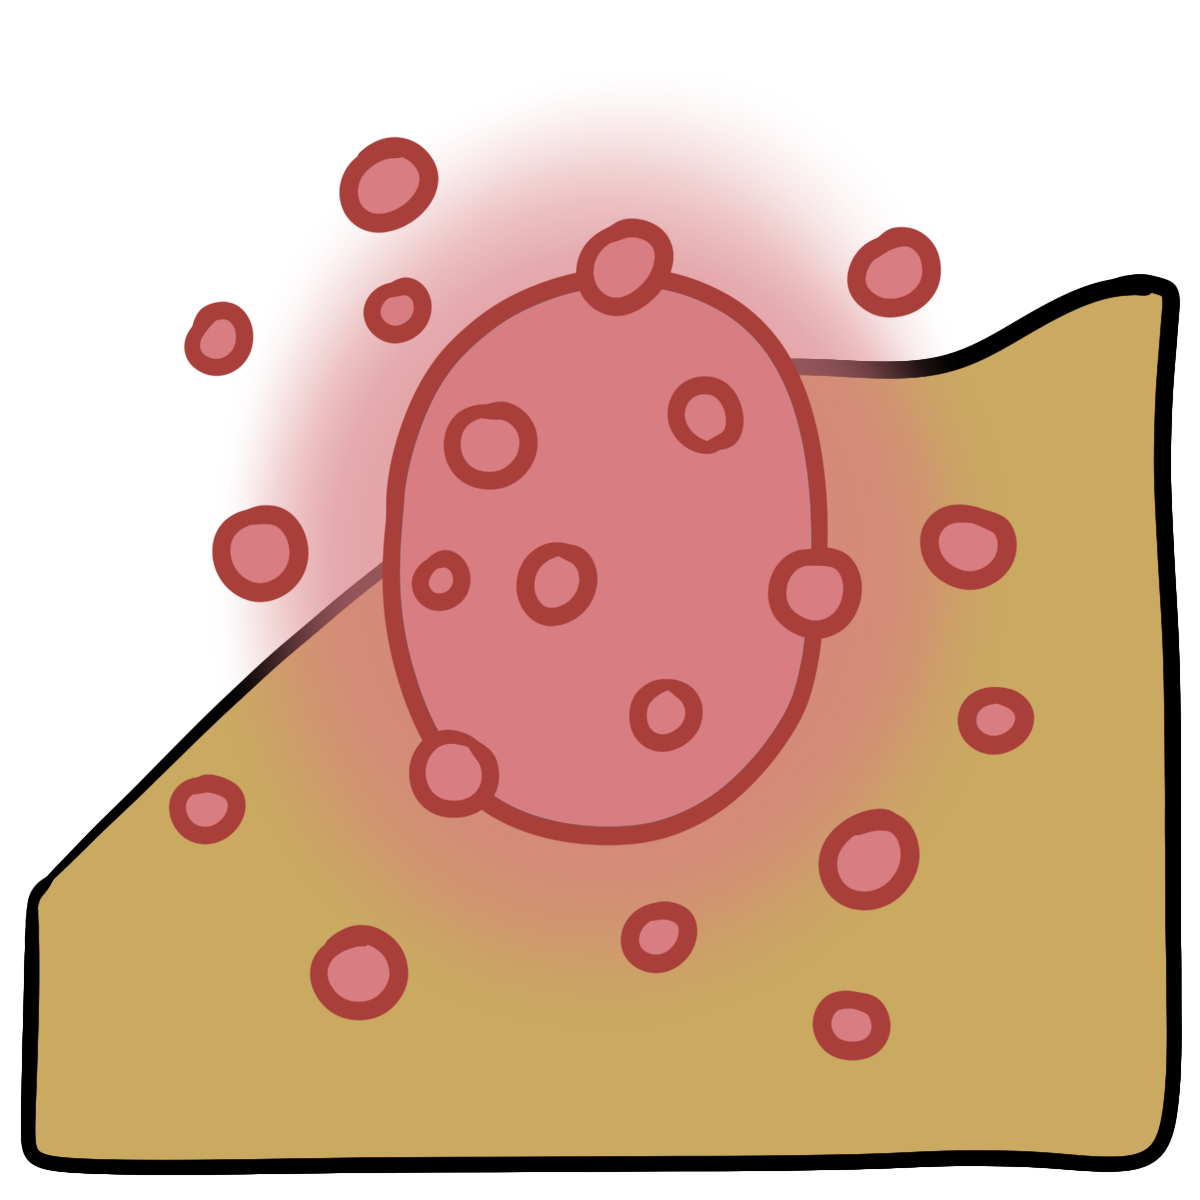 A pink glowing oval with pink dots around it. Curved yellow skin fills the bottom half of the background.